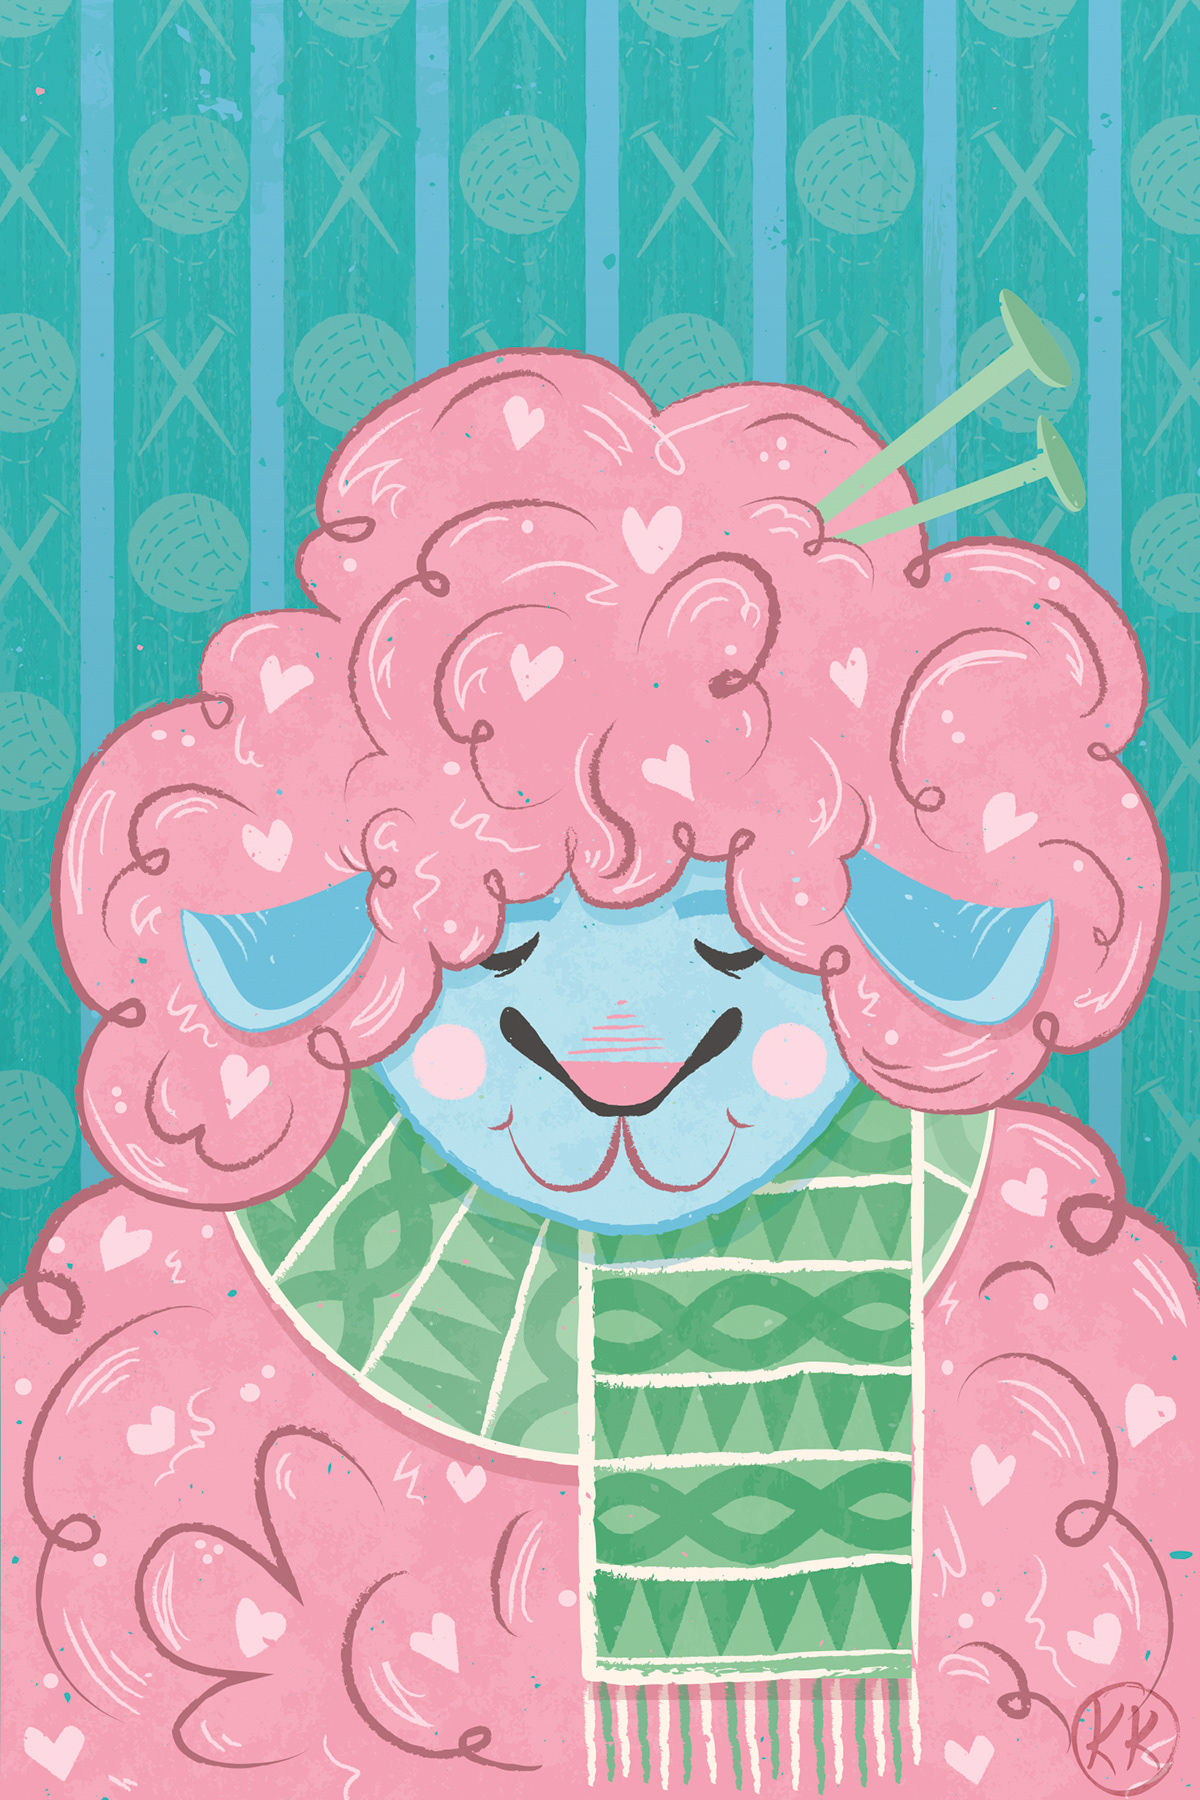 sheep knitting lamb pink blue green Picture book children's illustration Character sweet